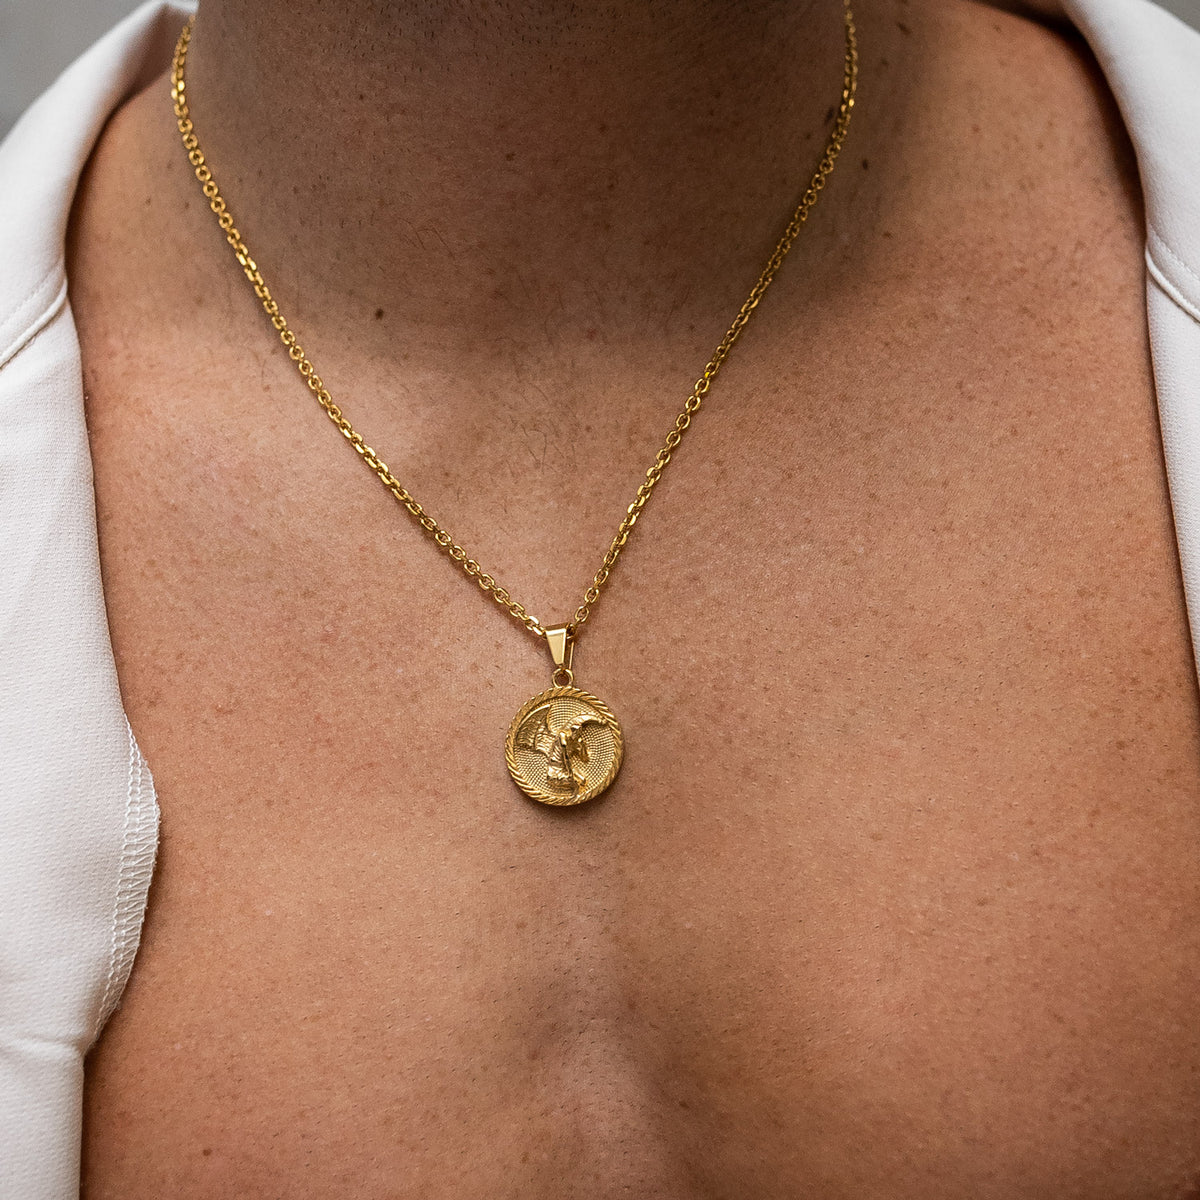 Mens medallion pendant in gold by statement